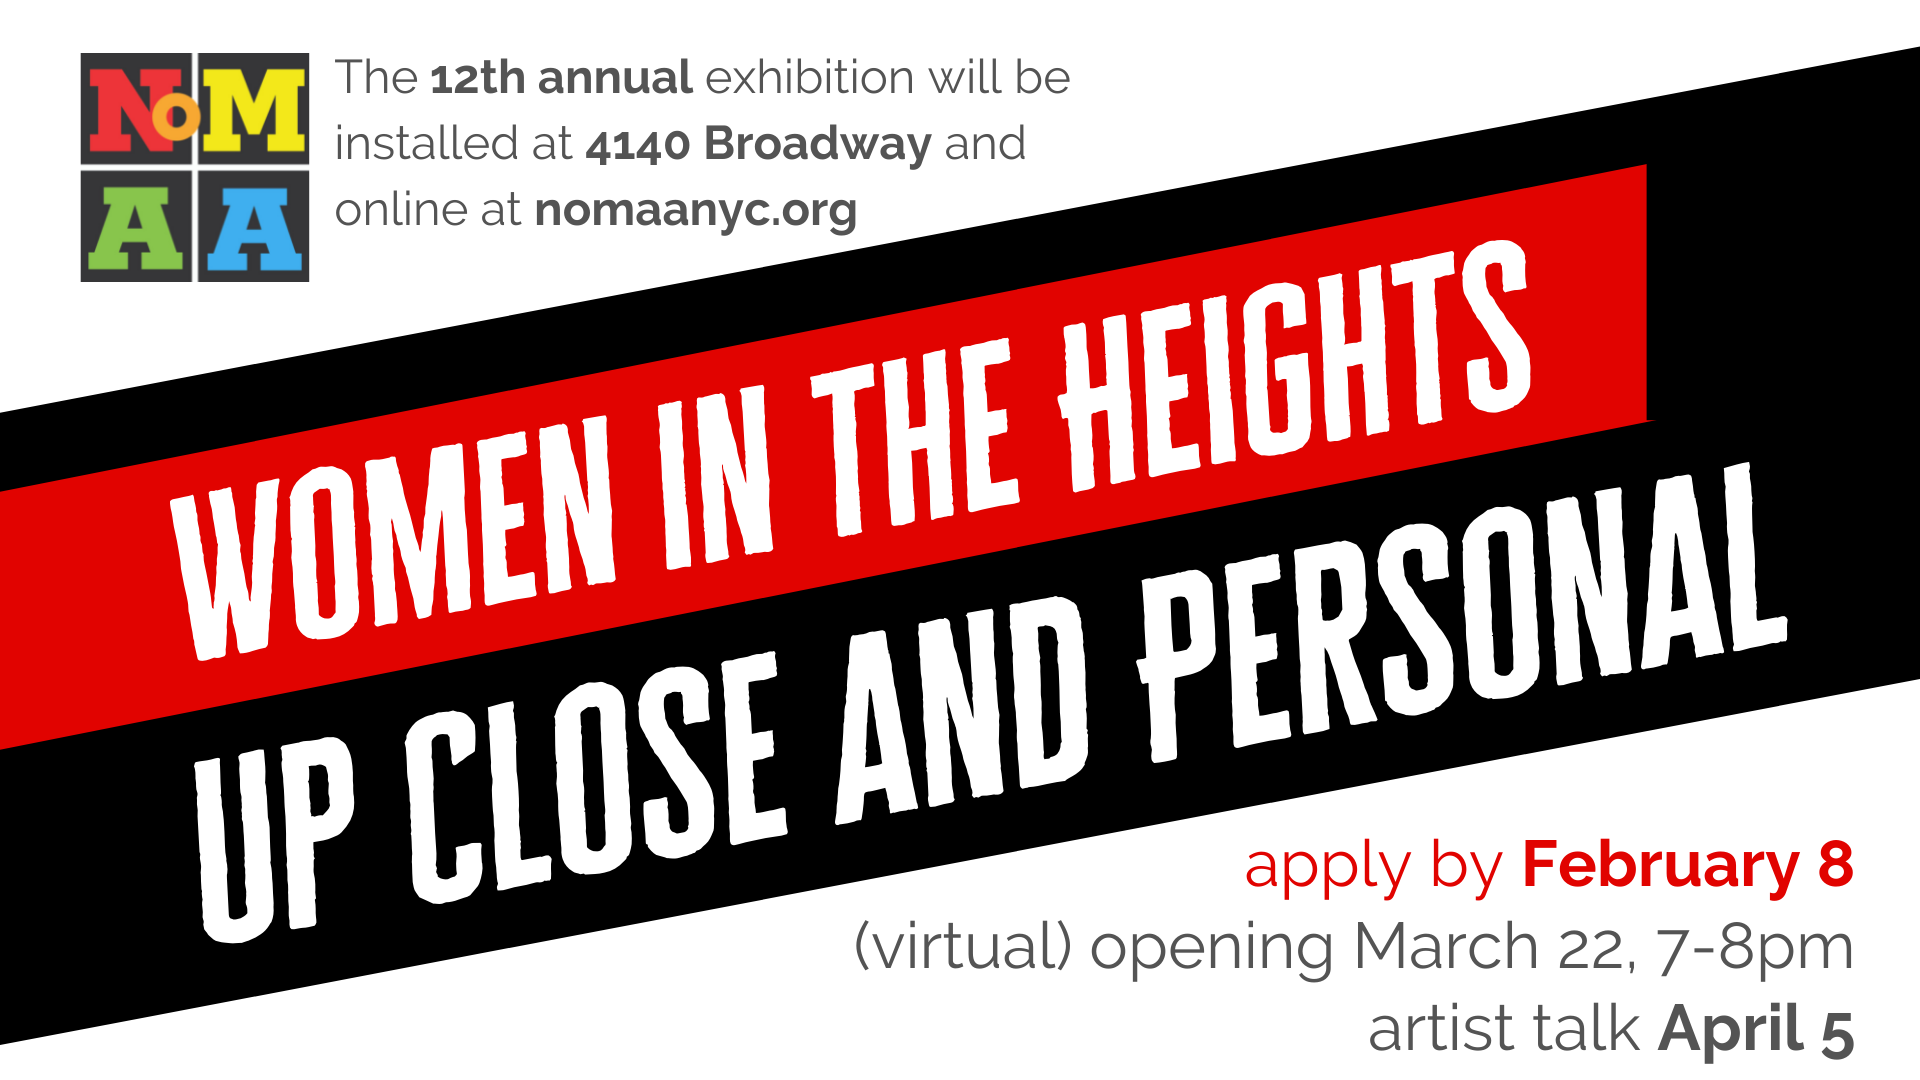 Women in the Heights: UP CLOSE AND PERSONAL